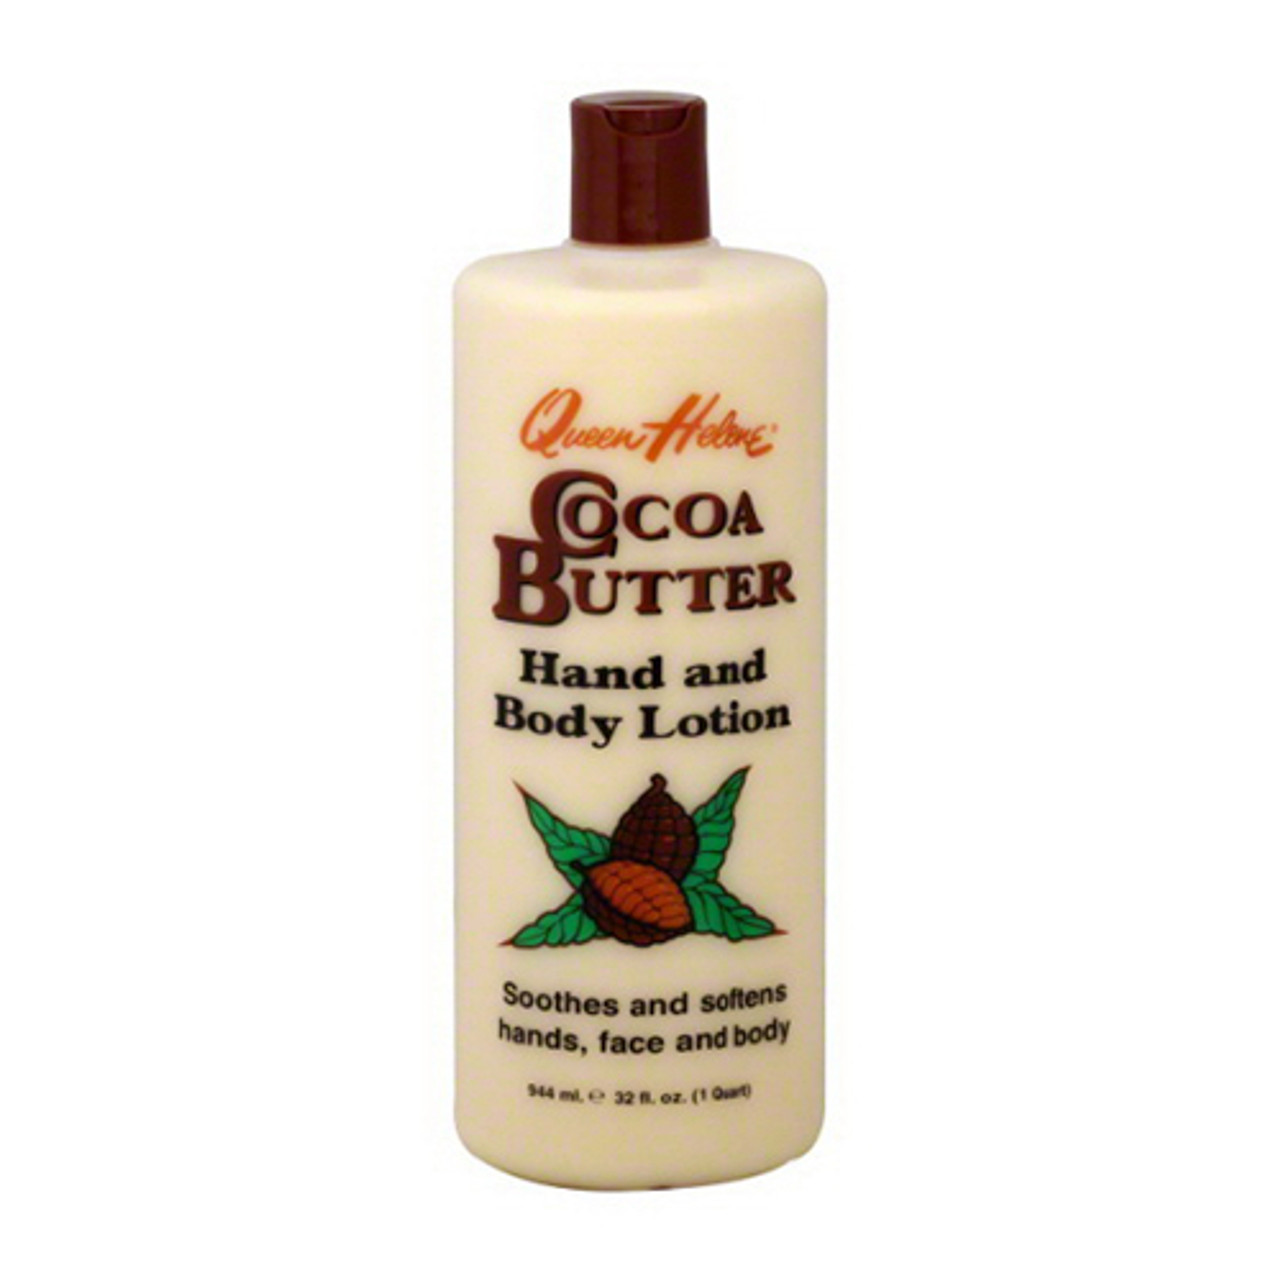 Queen Helene Cocoa Butter Hand Body Lotion - 32 Oz - myotcstore.com